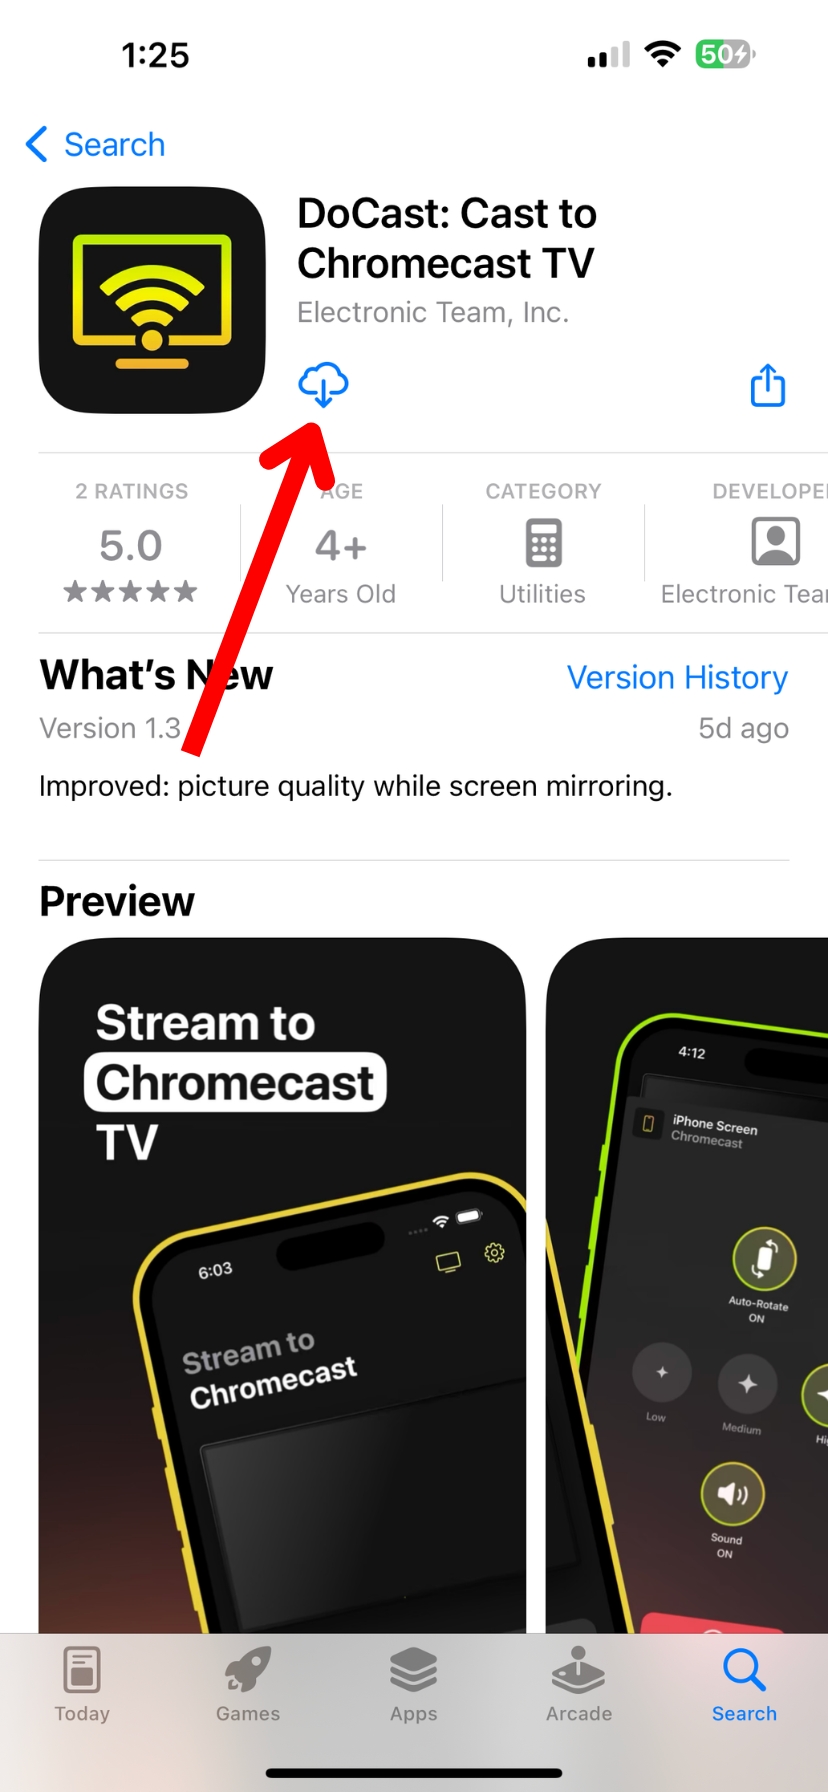 The DoCast app on the App Store